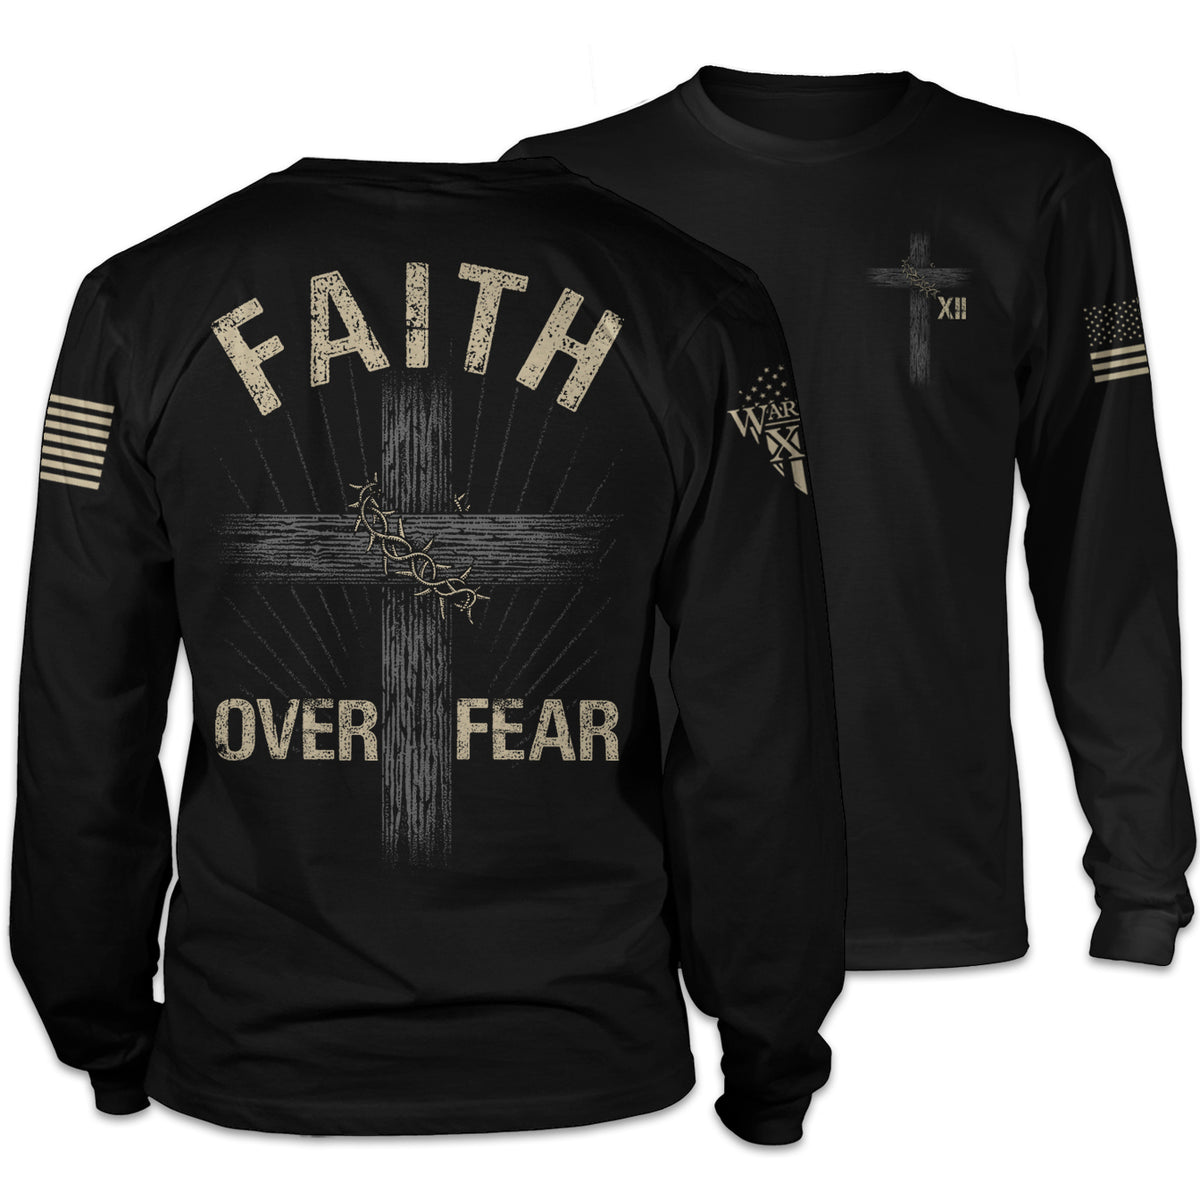 Front & back black long sleeve shirt with the words "Faith Over Fear" with a cross printed on the shirt.